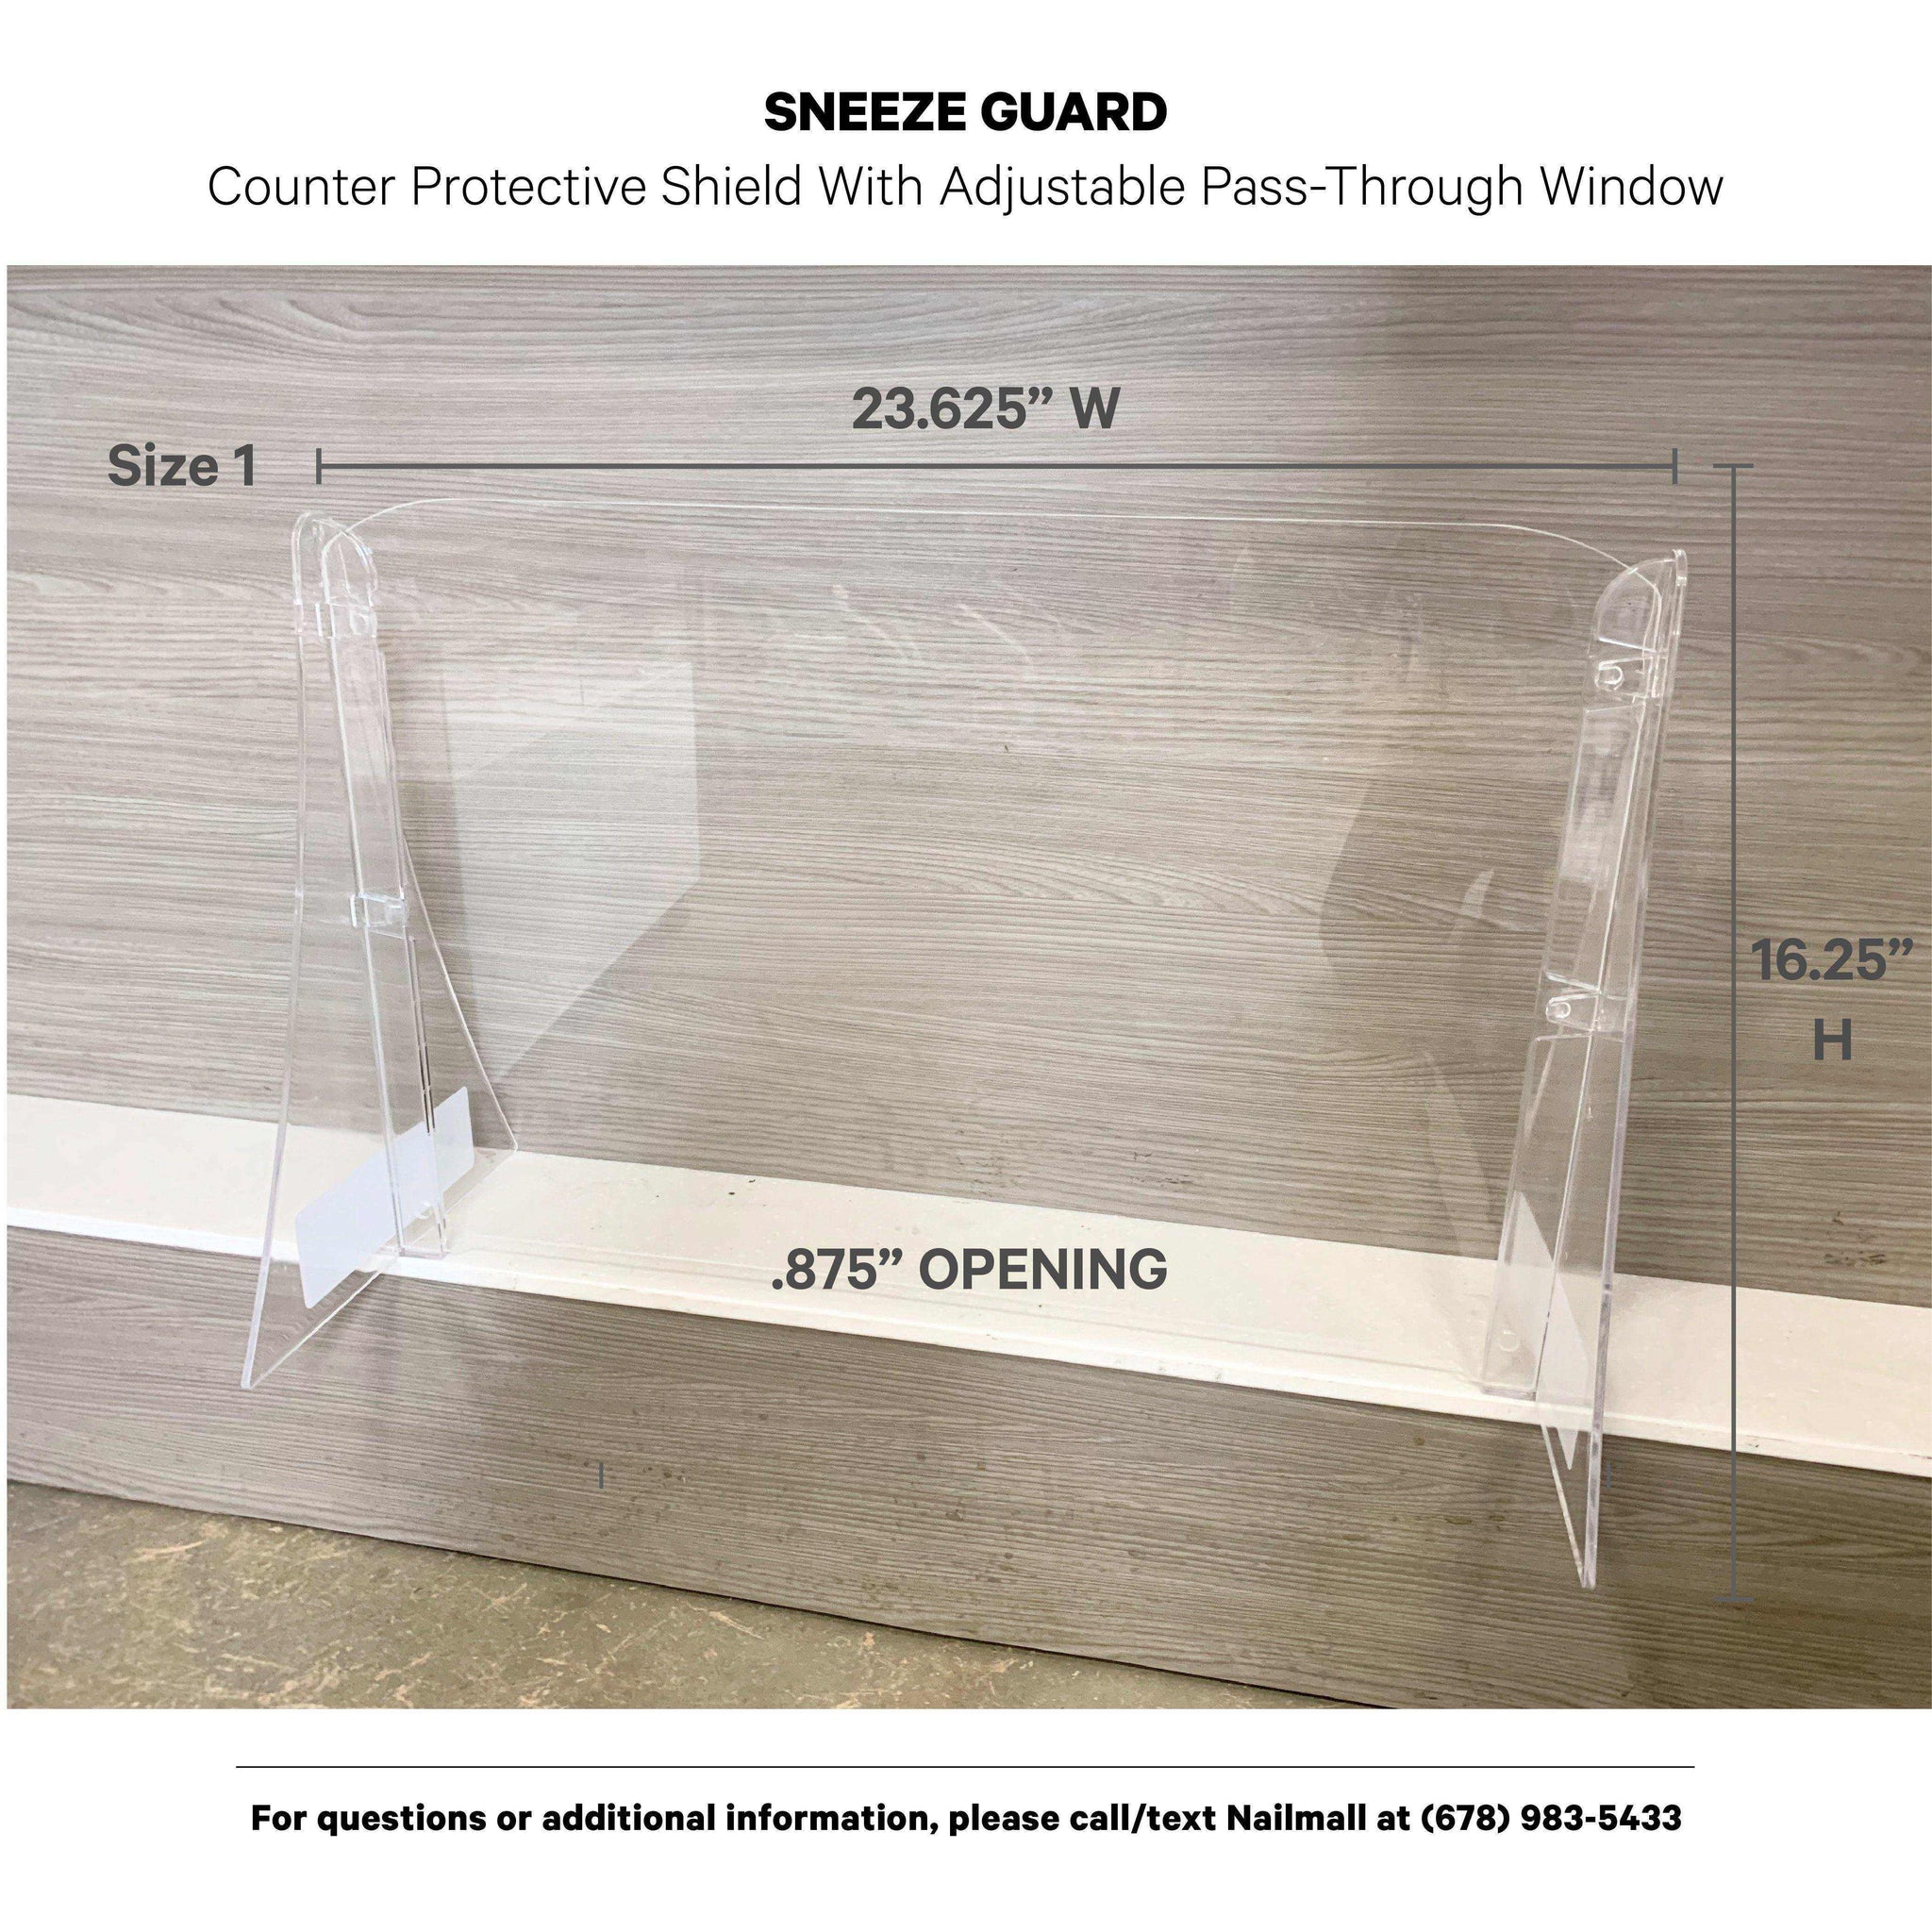 Sneeze Guard with Adjustable Pass-Through Window